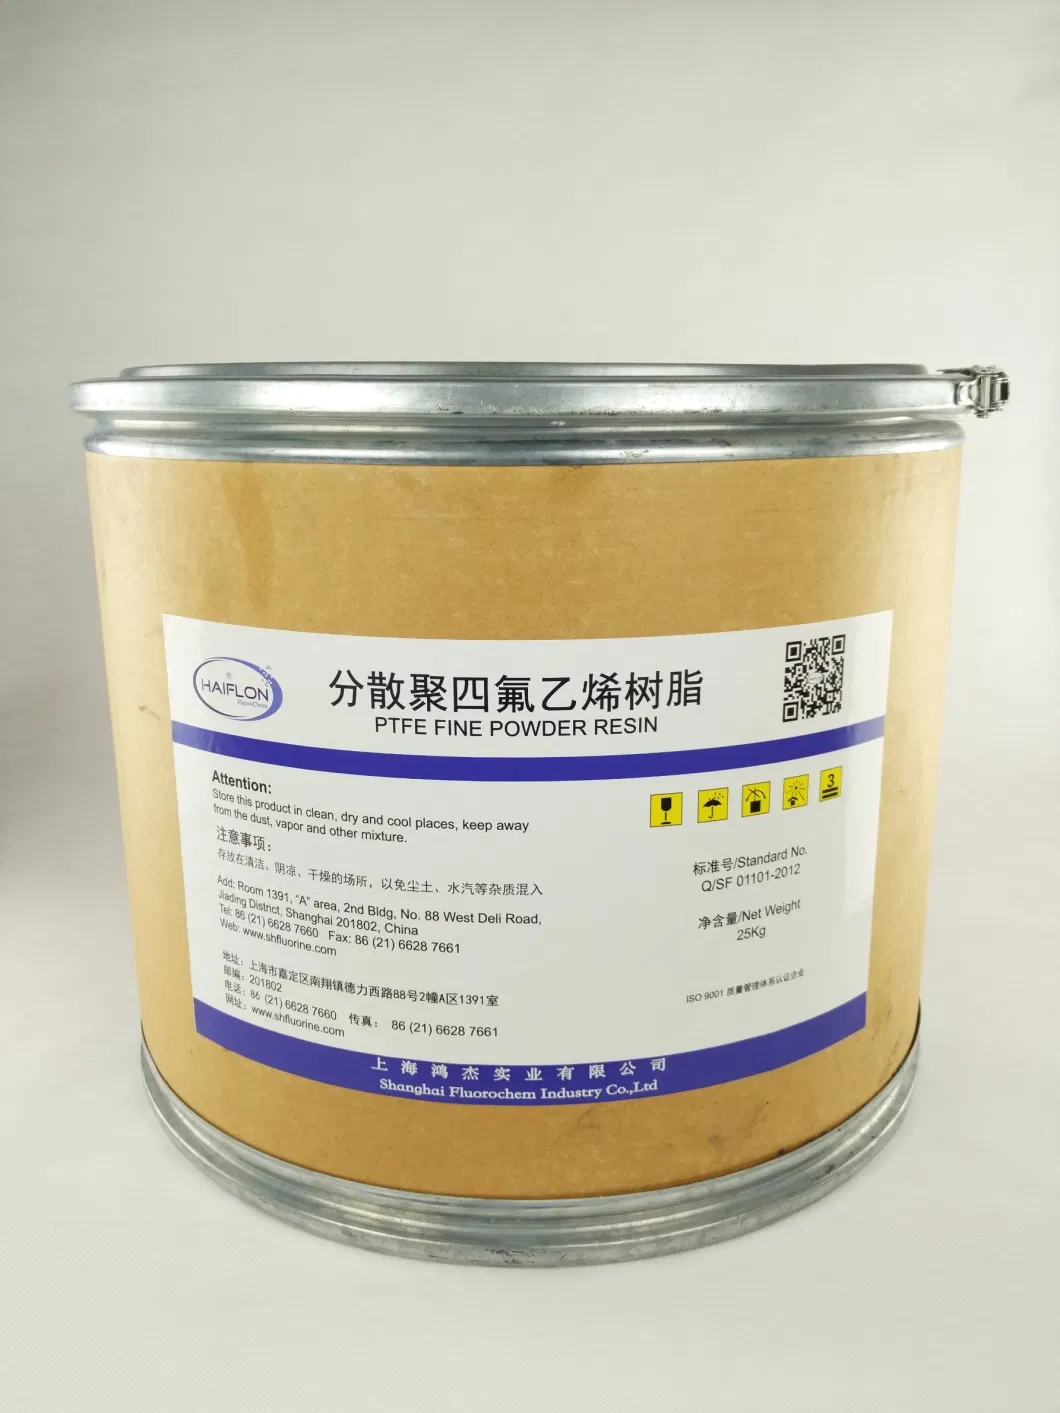 China Factory Supplied FEP Resin Pellets for FEP Film and FEP Tubing &Insulation and Jacketing of Communication Wire and Cable for Sale